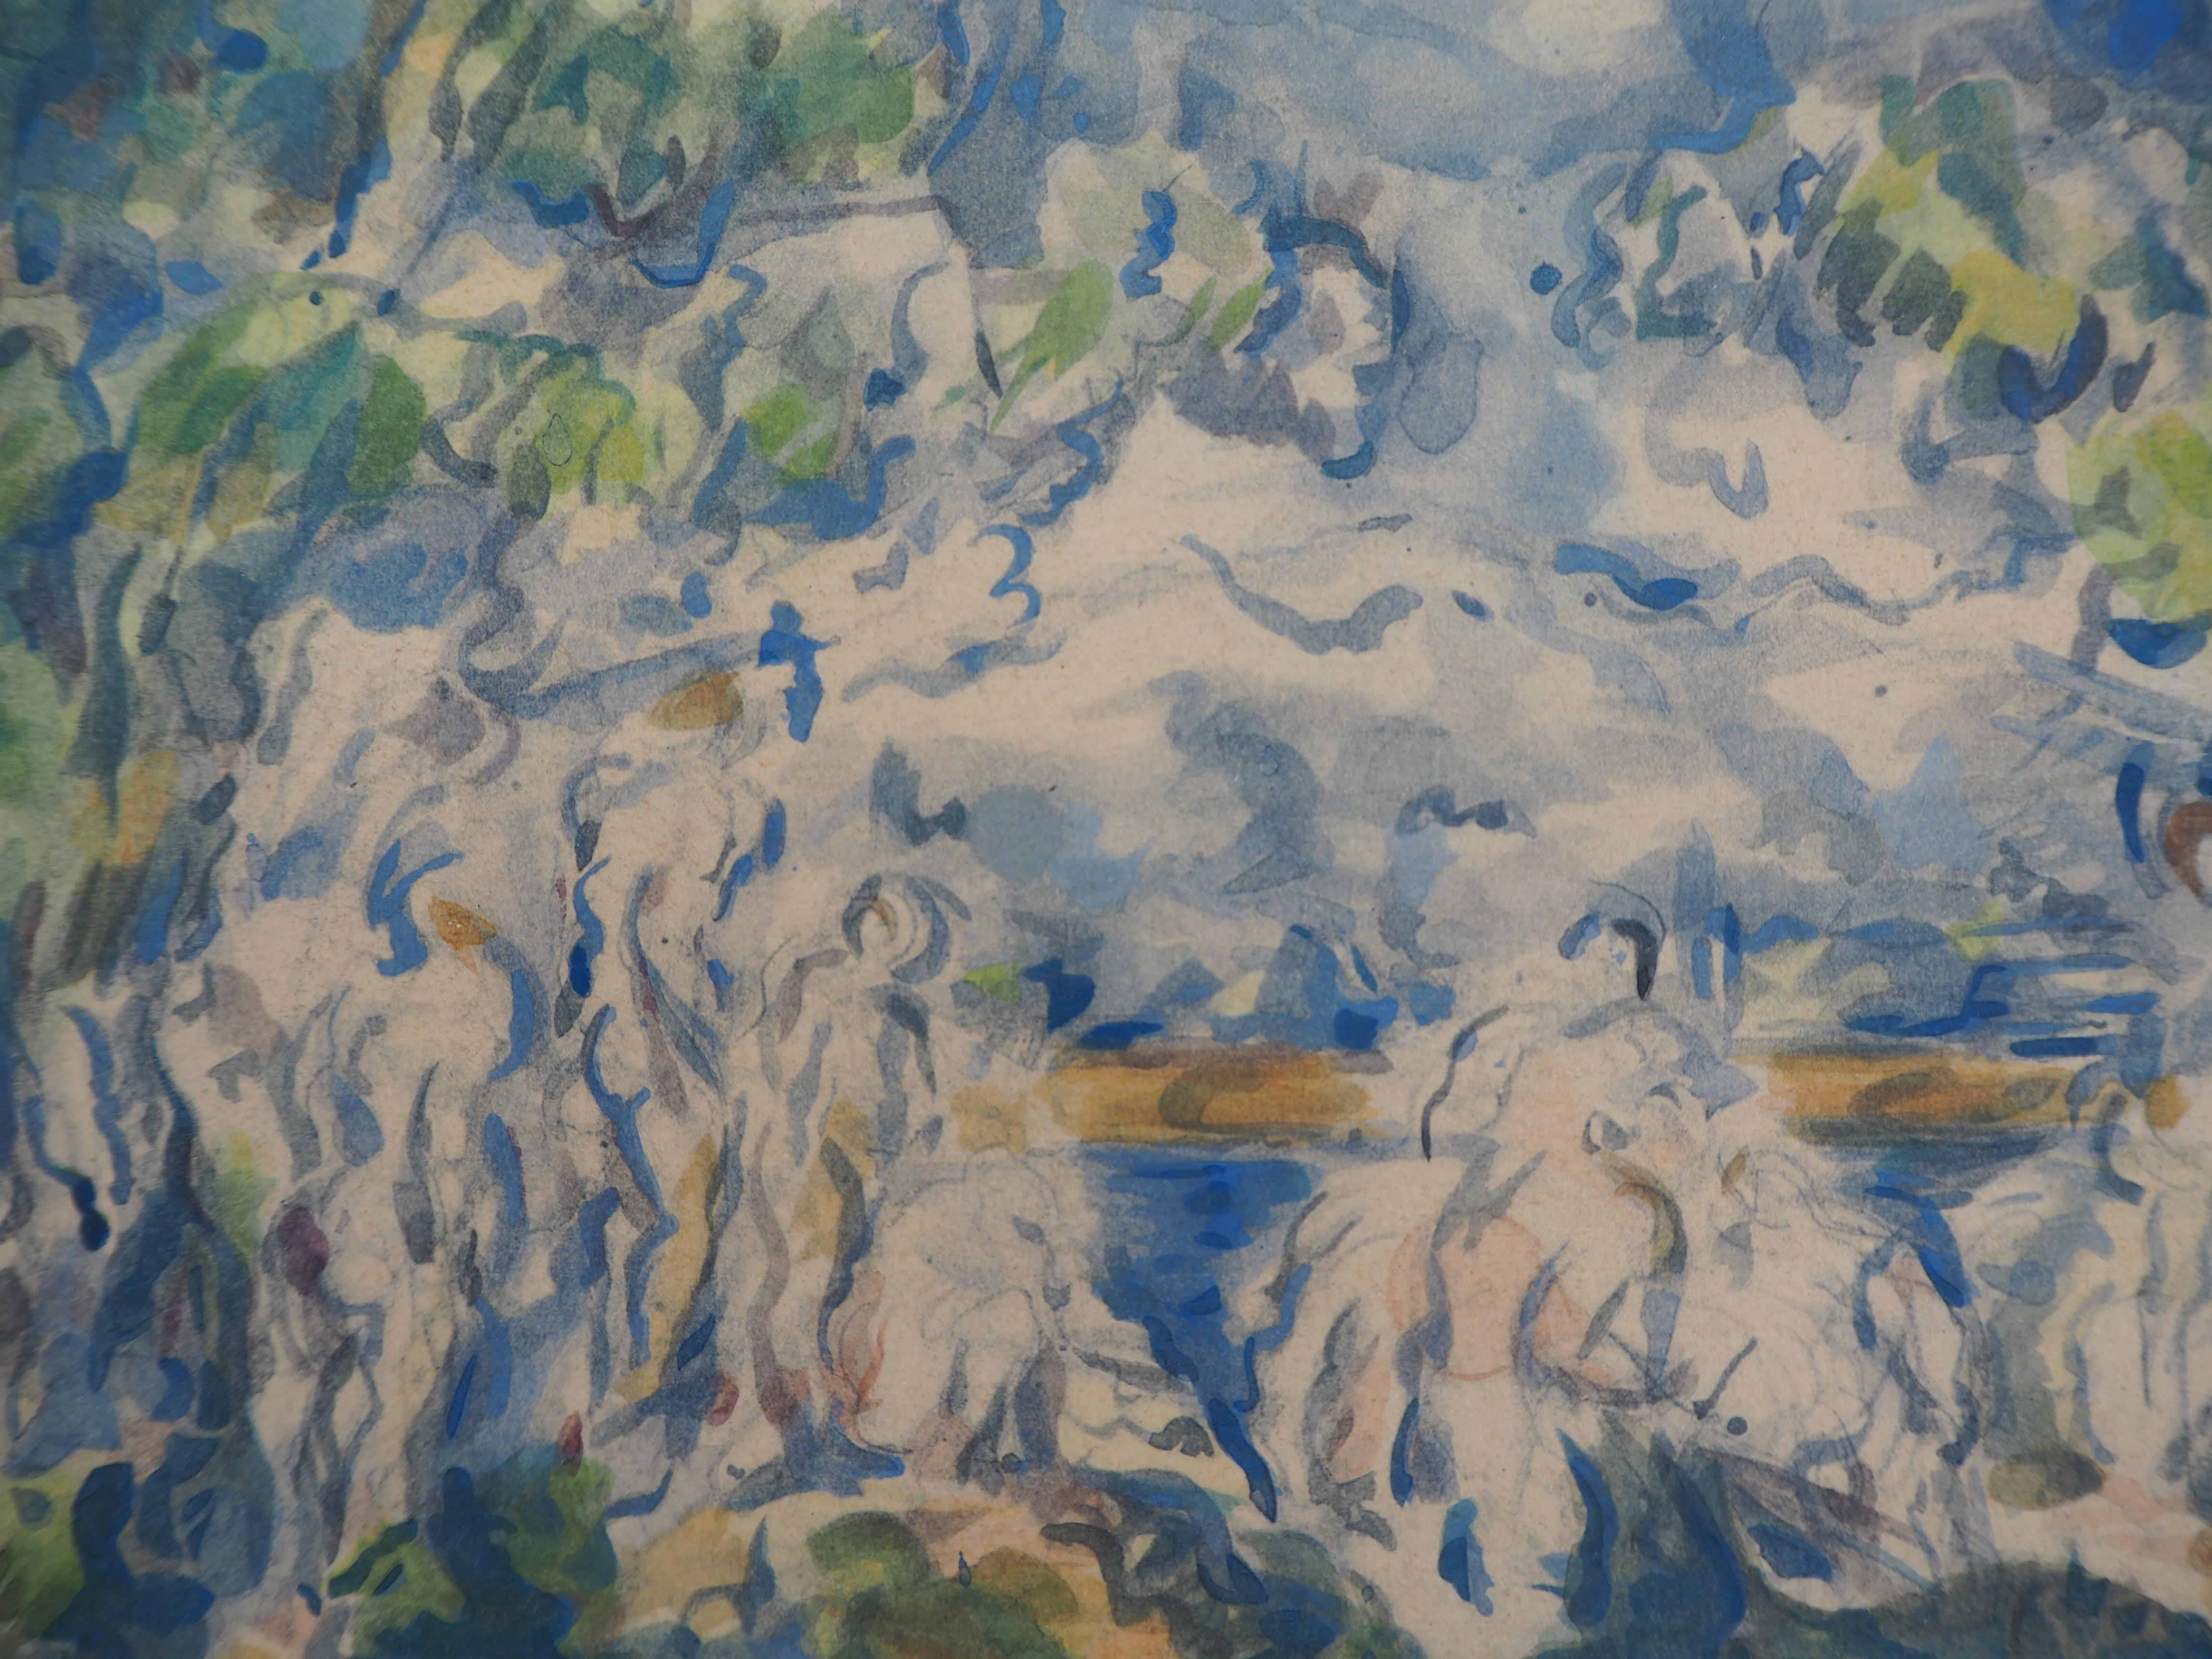 Bathers with Sainte Victoire Mountain - Lithograph and Stencil Watercolor, 1947 - Print by After Paul Cezanne